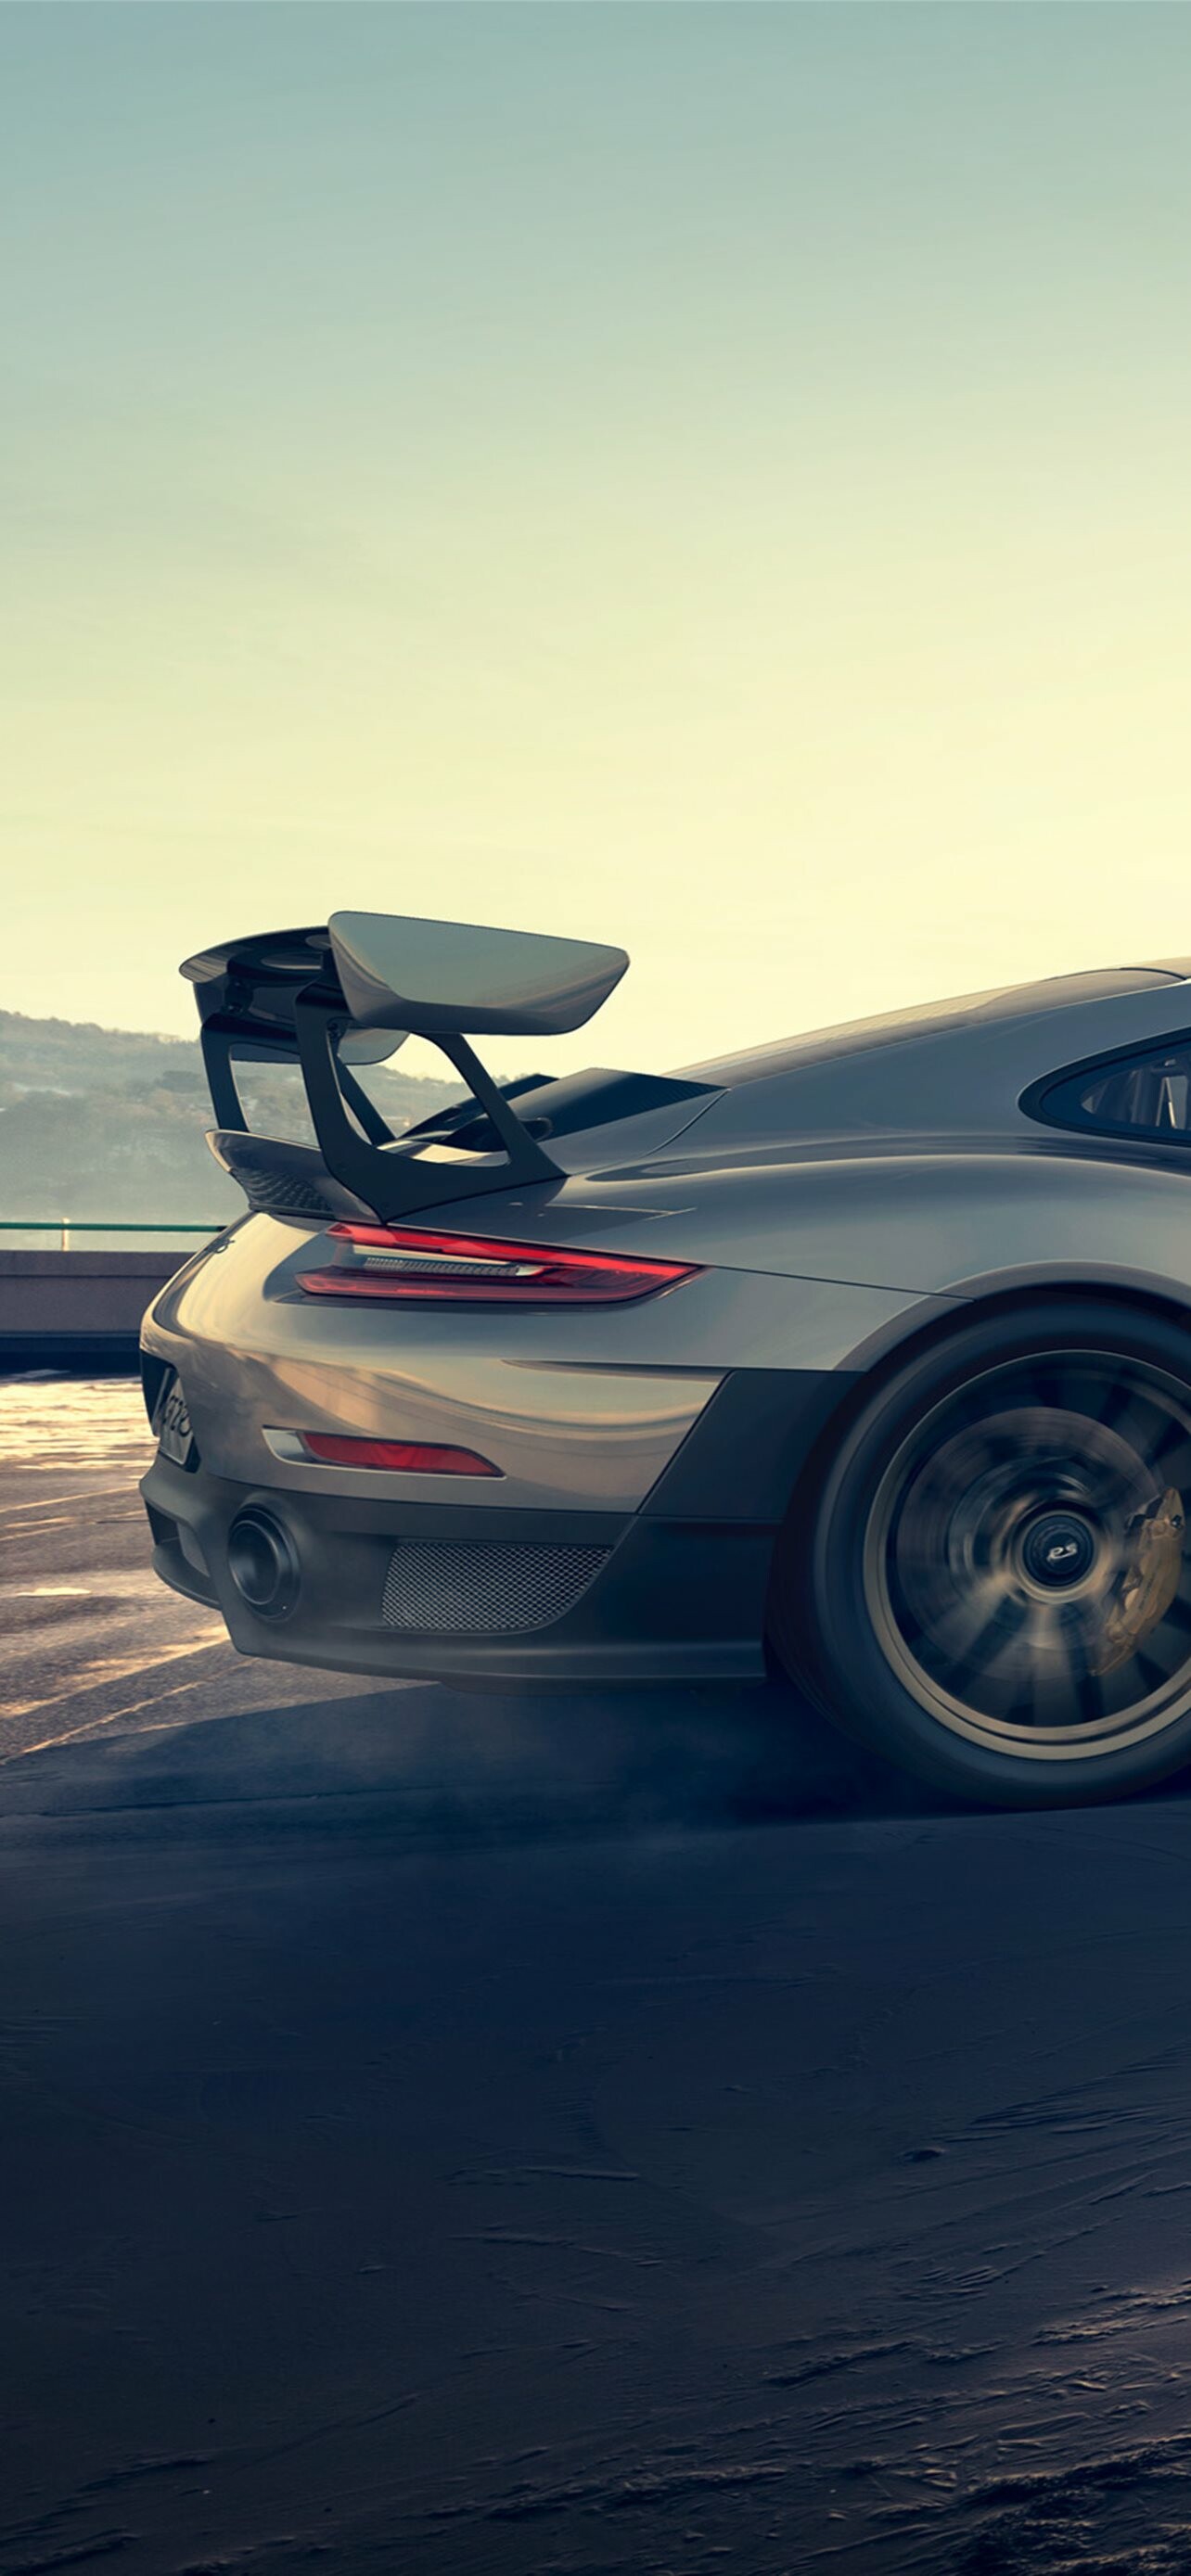 Porsche: GT2 RS, A high-performance, track-focused sports car built by the German automobile manufacturer. 1290x2780 HD Background.